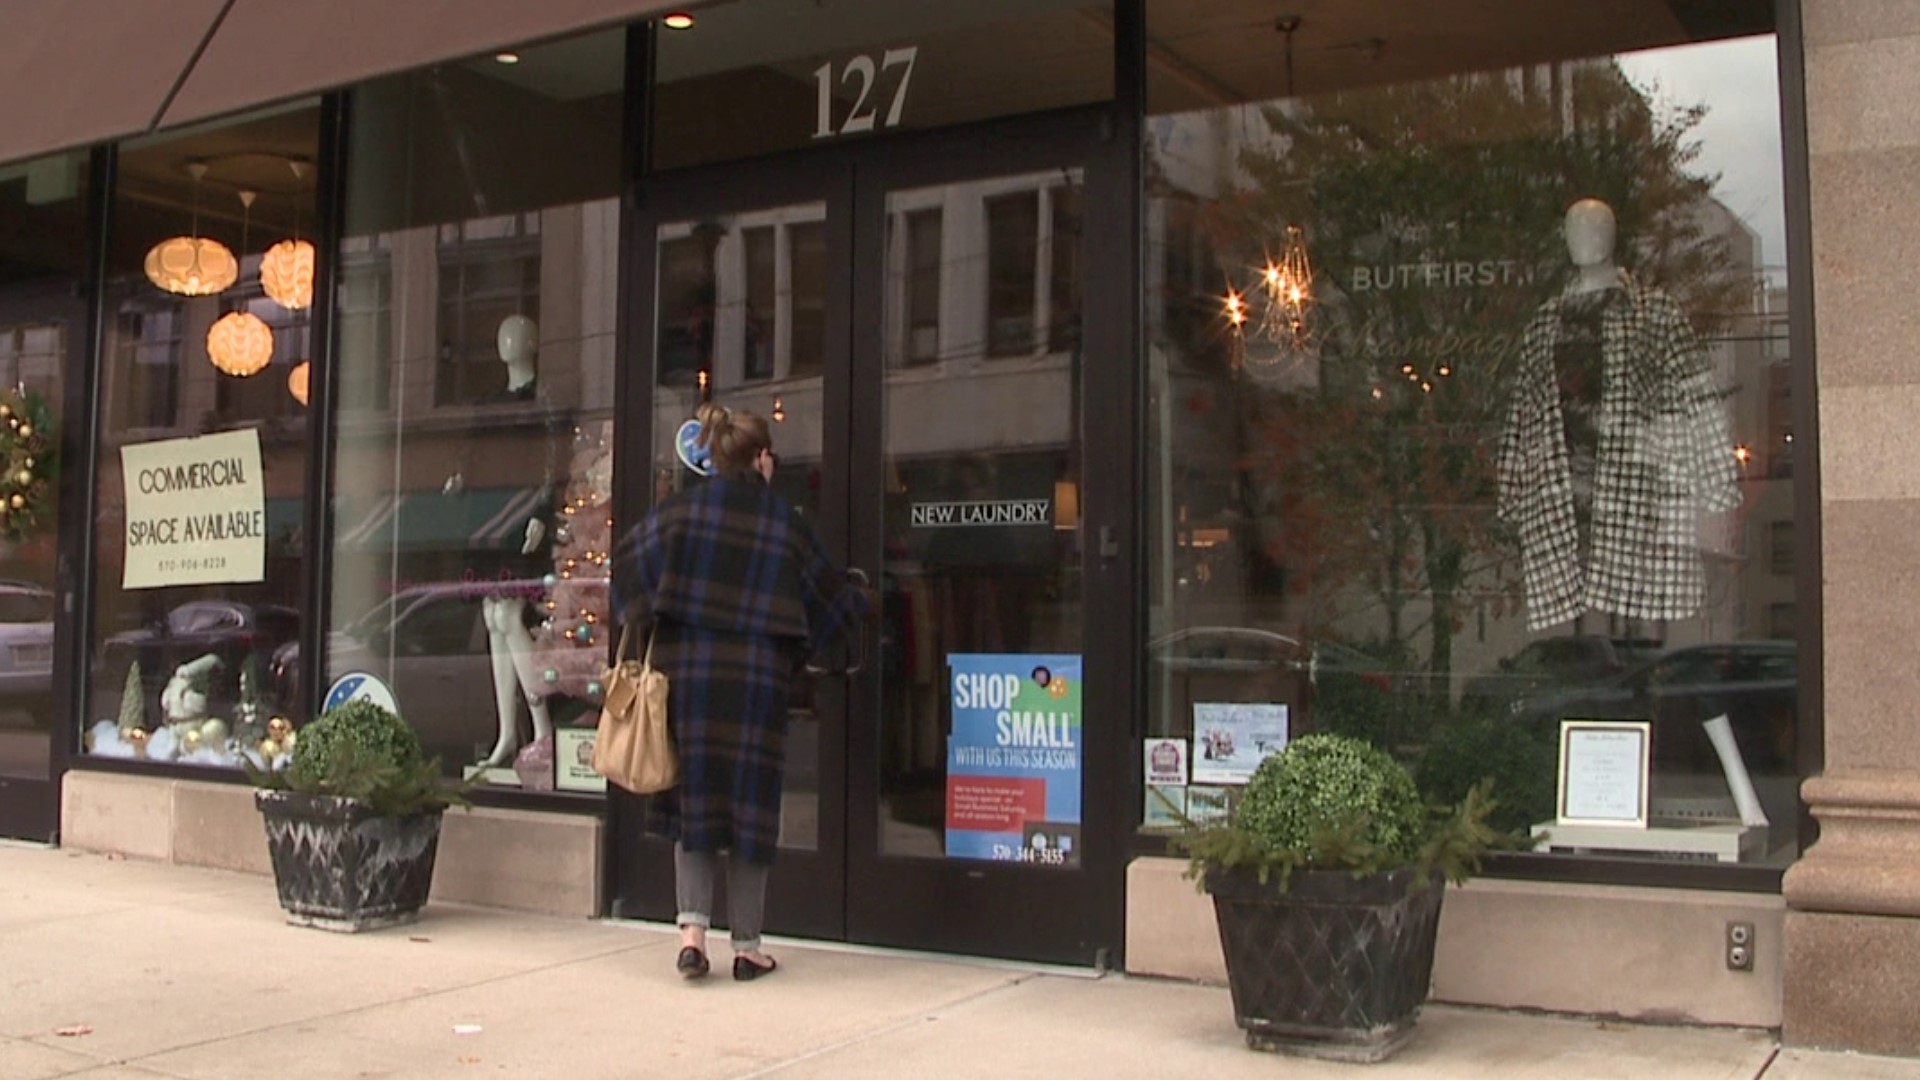 Black Friday is in the rearview mirror, but the holiday shopping is just getting started for small businesses in Lackawanna County.